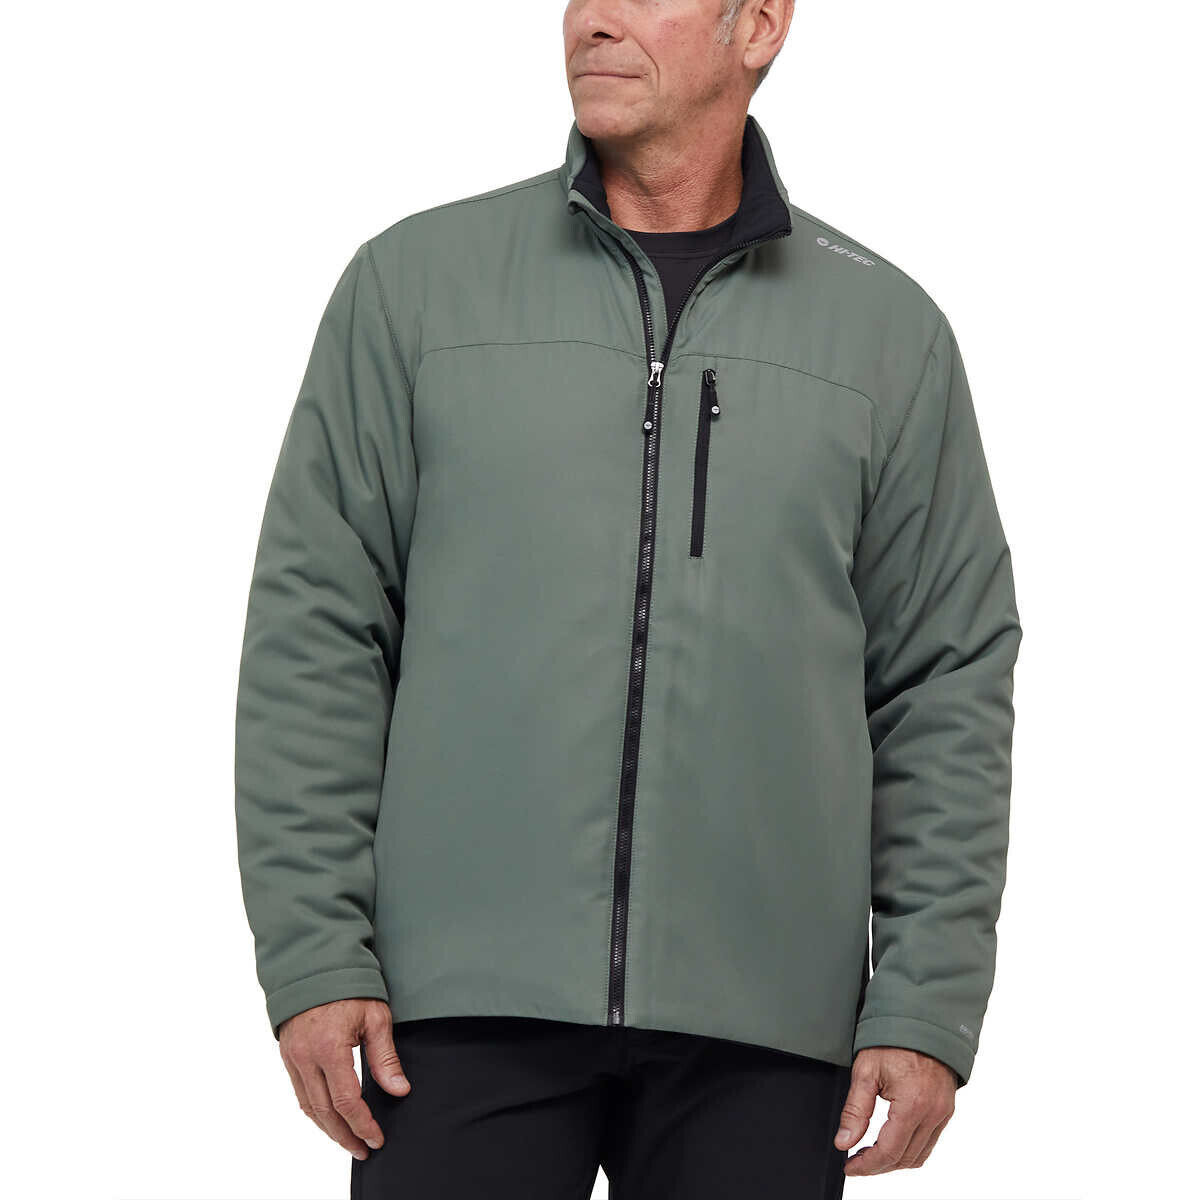 Primary image for Hi-Tec Men's Full Zip Thermo Filled Transitional Jacket , Size M, Green